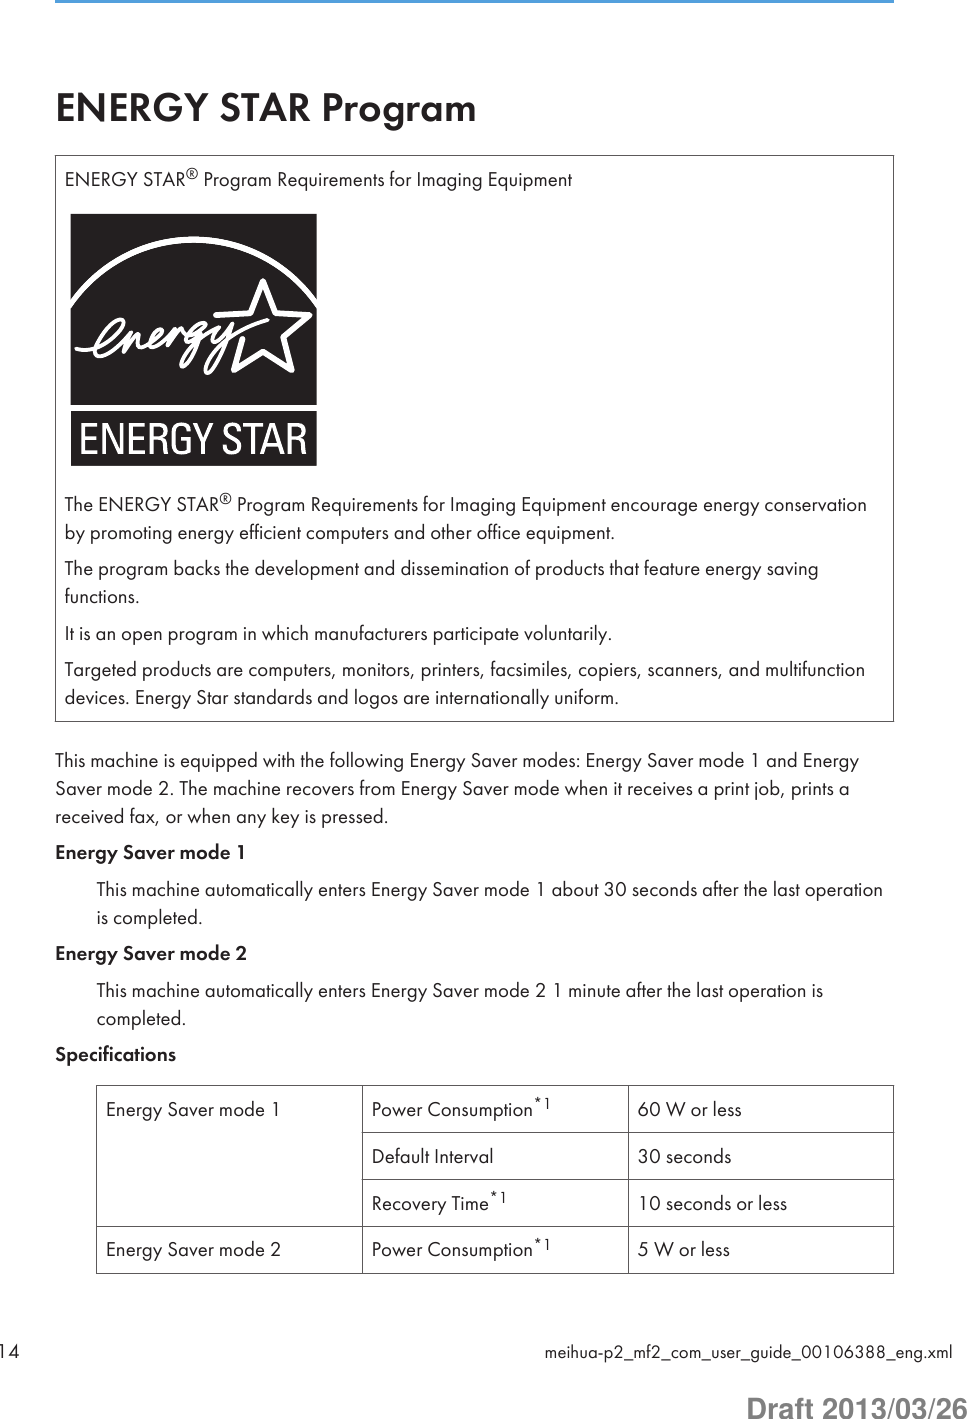 ENERGY STAR ProgramENERGY STAR® Program Requirements for Imaging EquipmentThe ENERGY STAR® Program Requirements for Imaging Equipment encourage energy conservationby promoting energy efficient computers and other office equipment.The program backs the development and dissemination of products that feature energy savingfunctions.It is an open program in which manufacturers participate voluntarily.Targeted products are computers, monitors, printers, facsimiles, copiers, scanners, and multifunctiondevices. Energy Star standards and logos are internationally uniform.This machine is equipped with the following Energy Saver modes: Energy Saver mode 1 and EnergySaver mode 2. The machine recovers from Energy Saver mode when it receives a print job, prints areceived fax, or when any key is pressed.Energy Saver mode 1This machine automatically enters Energy Saver mode 1 about 30 seconds after the last operationis completed.Energy Saver mode 2This machine automatically enters Energy Saver mode 2 1 minute after the last operation iscompleted.SpecificationsEnergy Saver mode 1 Power Consumption*1 60 W or lessDefault Interval 30 secondsRecovery Time*1 10 seconds or lessEnergy Saver mode 2 Power Consumption*1 5 W or less14 meihua-p2_mf2_com_user_guide_00106388_eng.xmlDraft 2013/03/26